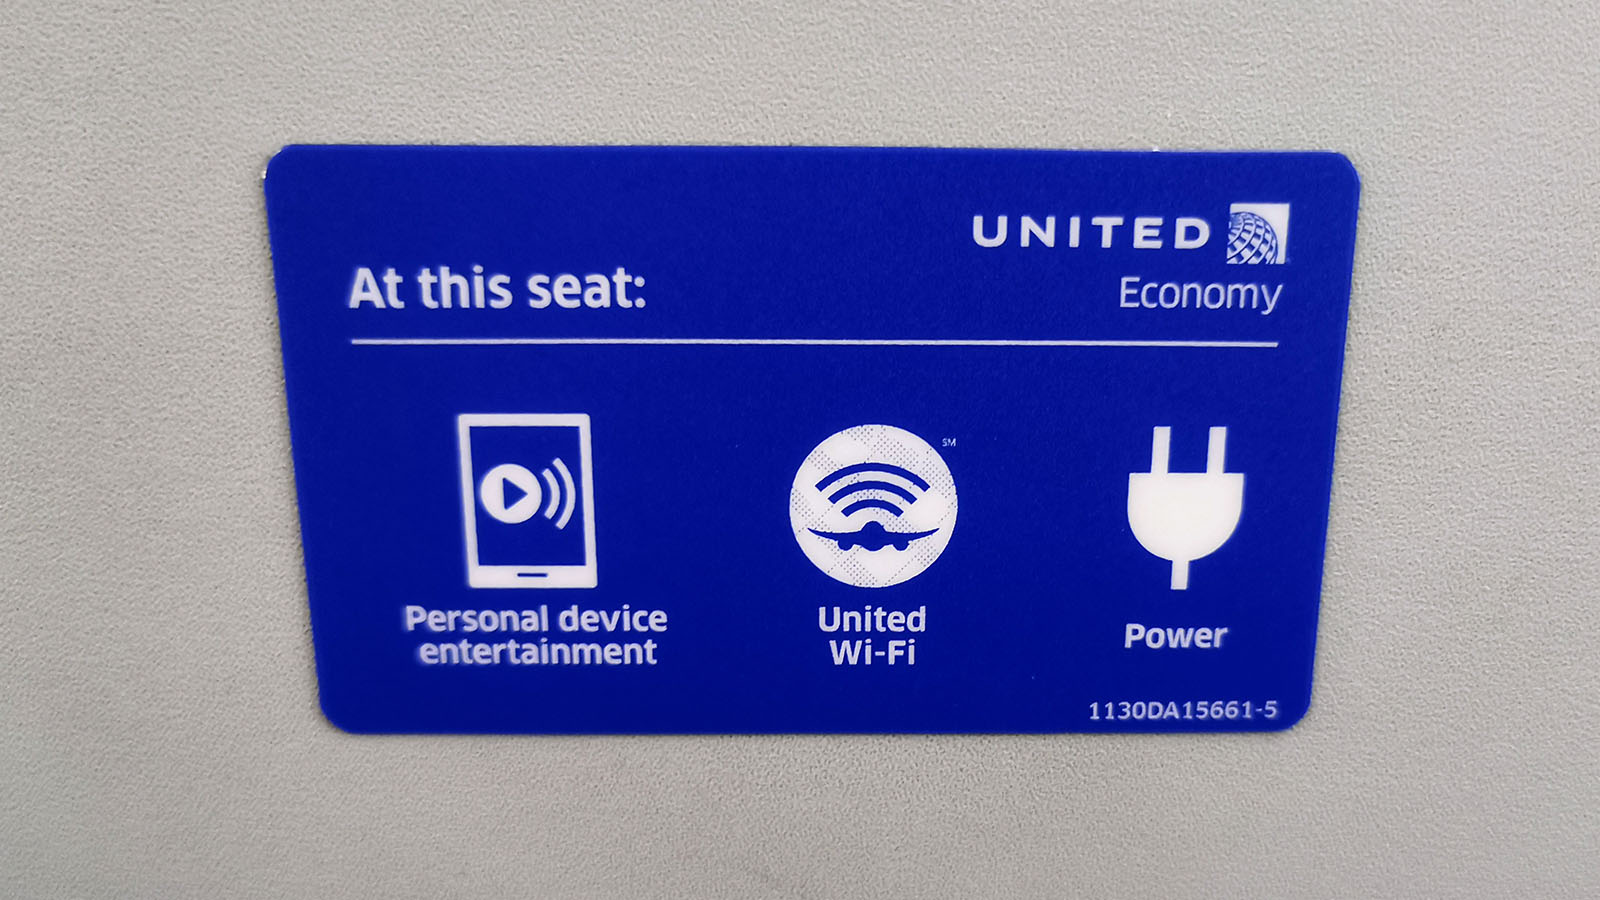 Seat amenities in United Airlines Boeing 787 Economy